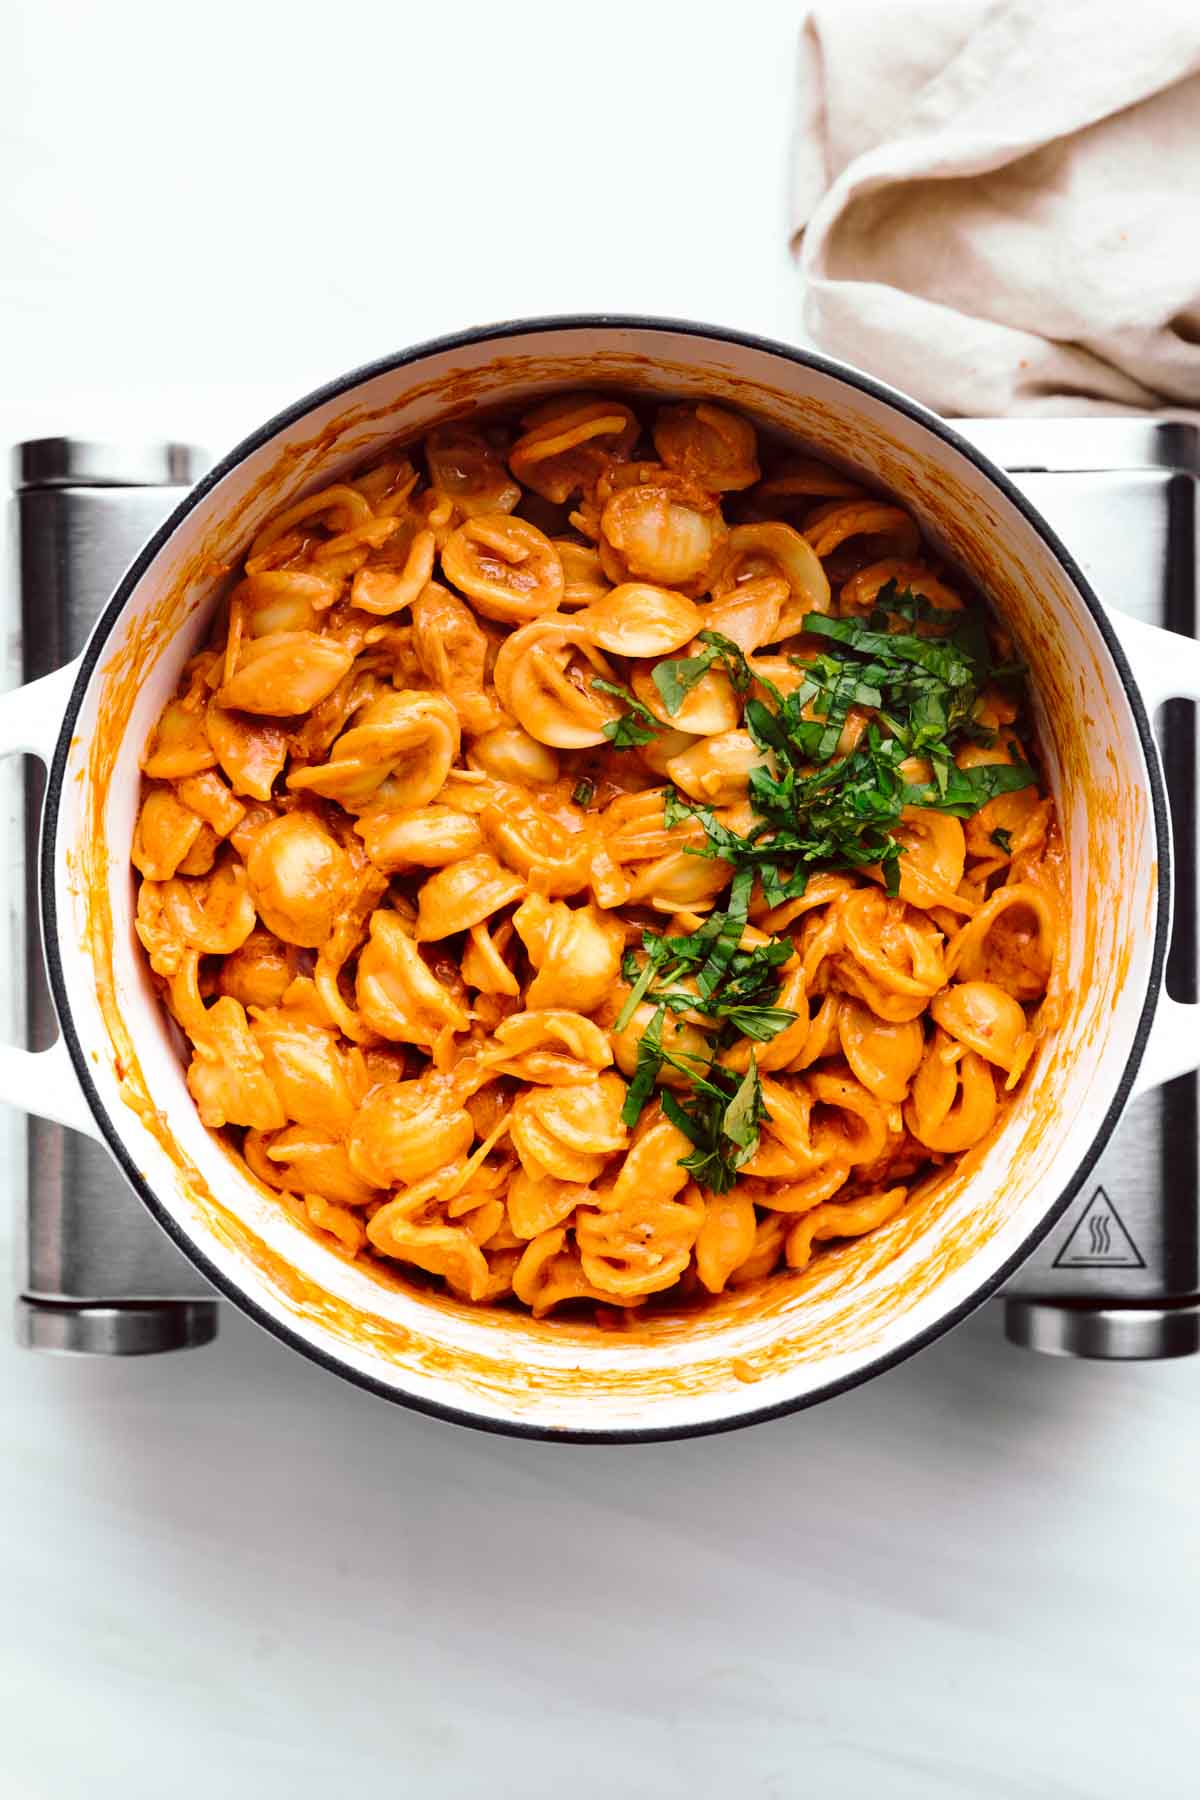 A large white pot with orange colored shell pasta in the pot sprinkled with chopped green basil on a little stove with a napkin next to it.